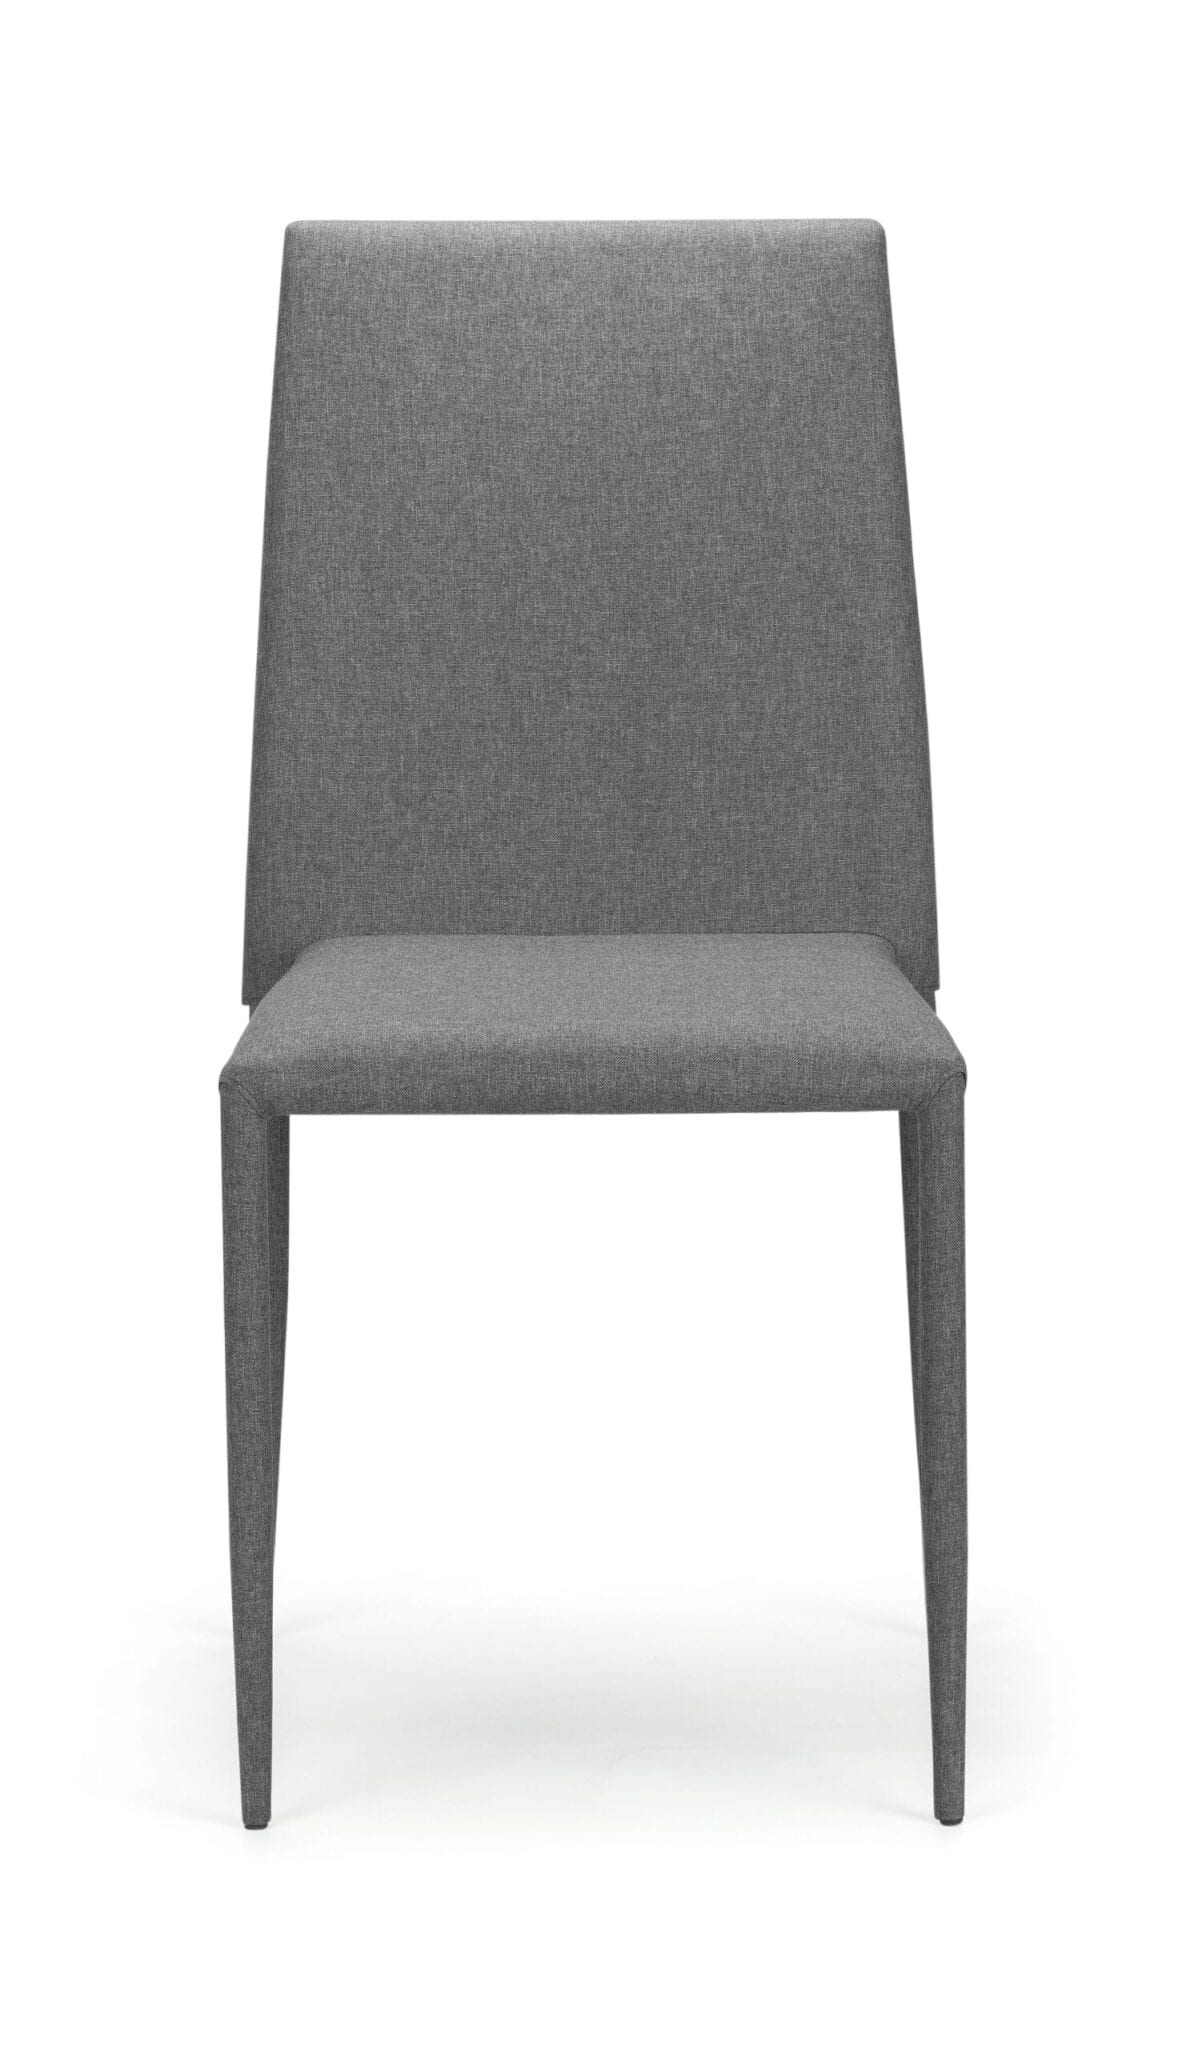 Wizz Stacking Chair Grey